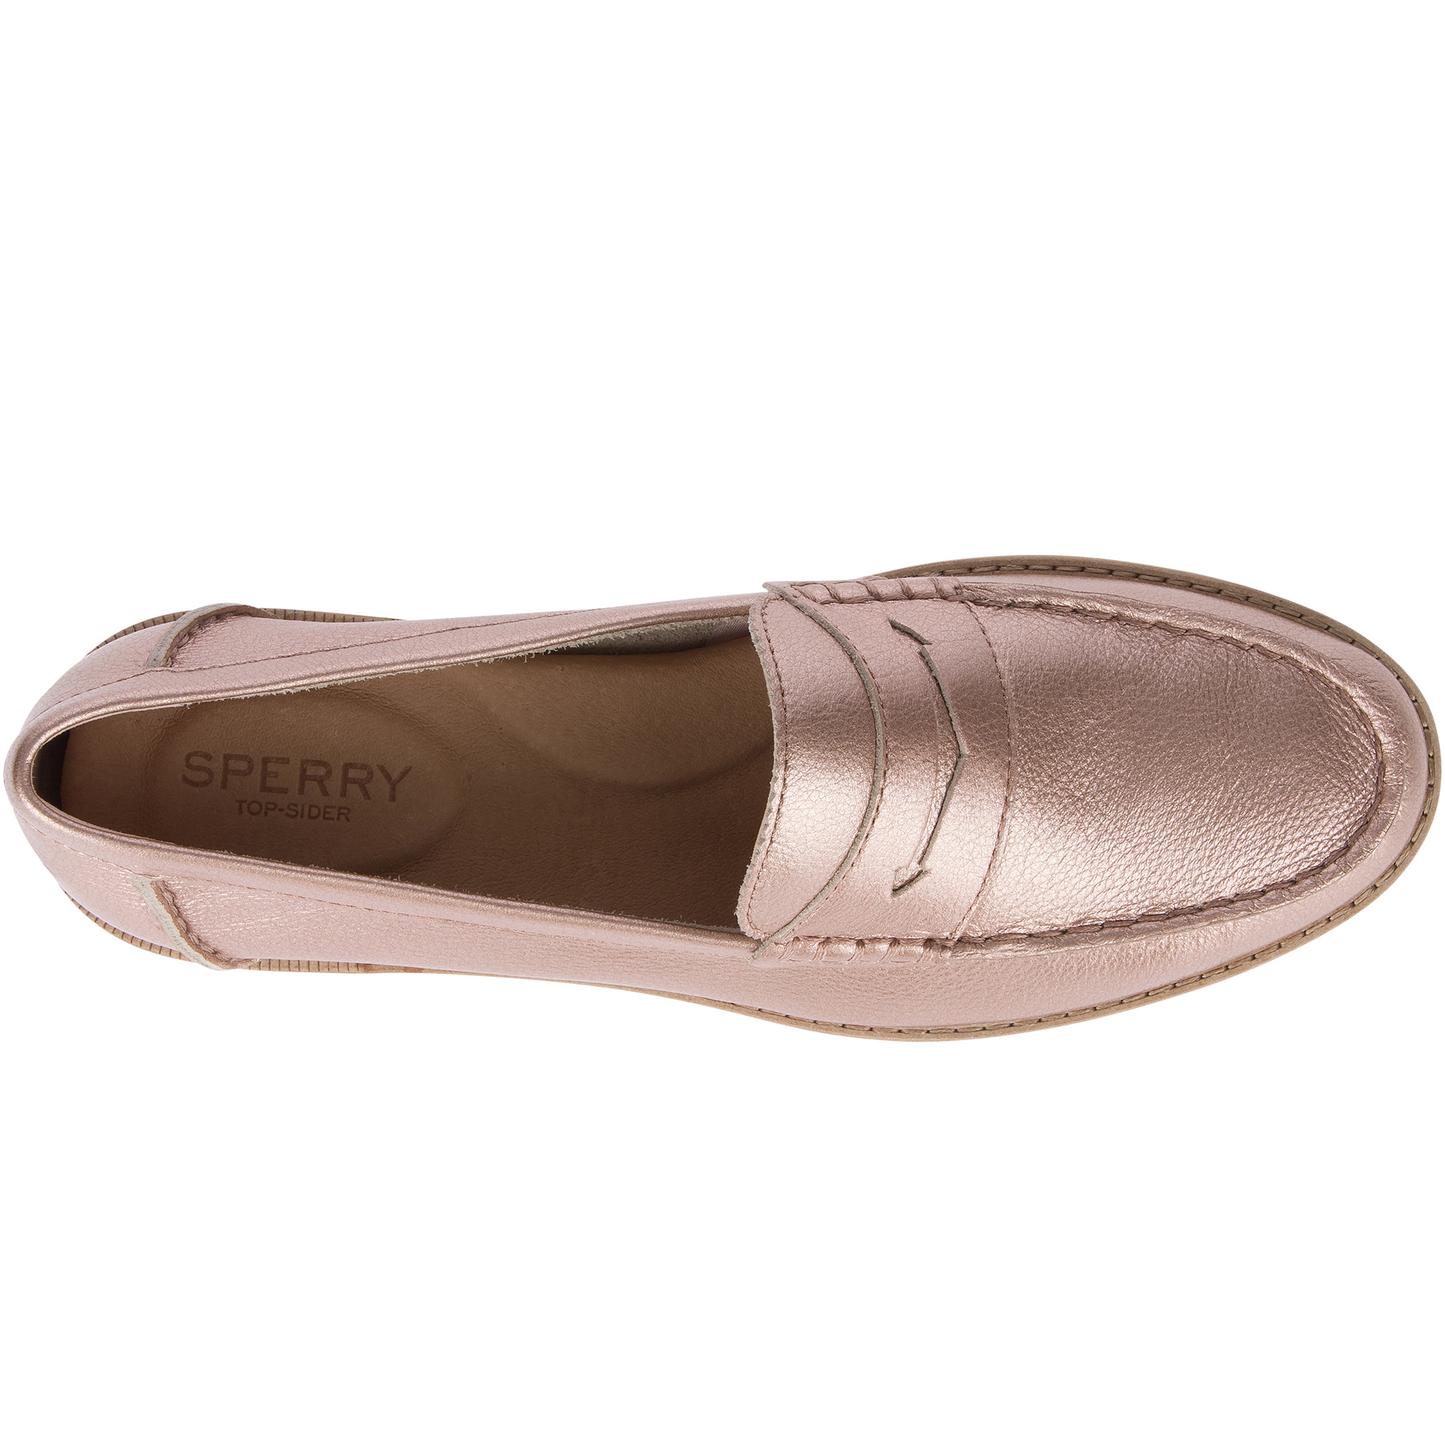 Sperry Women's Seaport Penny Loafer - Rose Gold (STS83408)